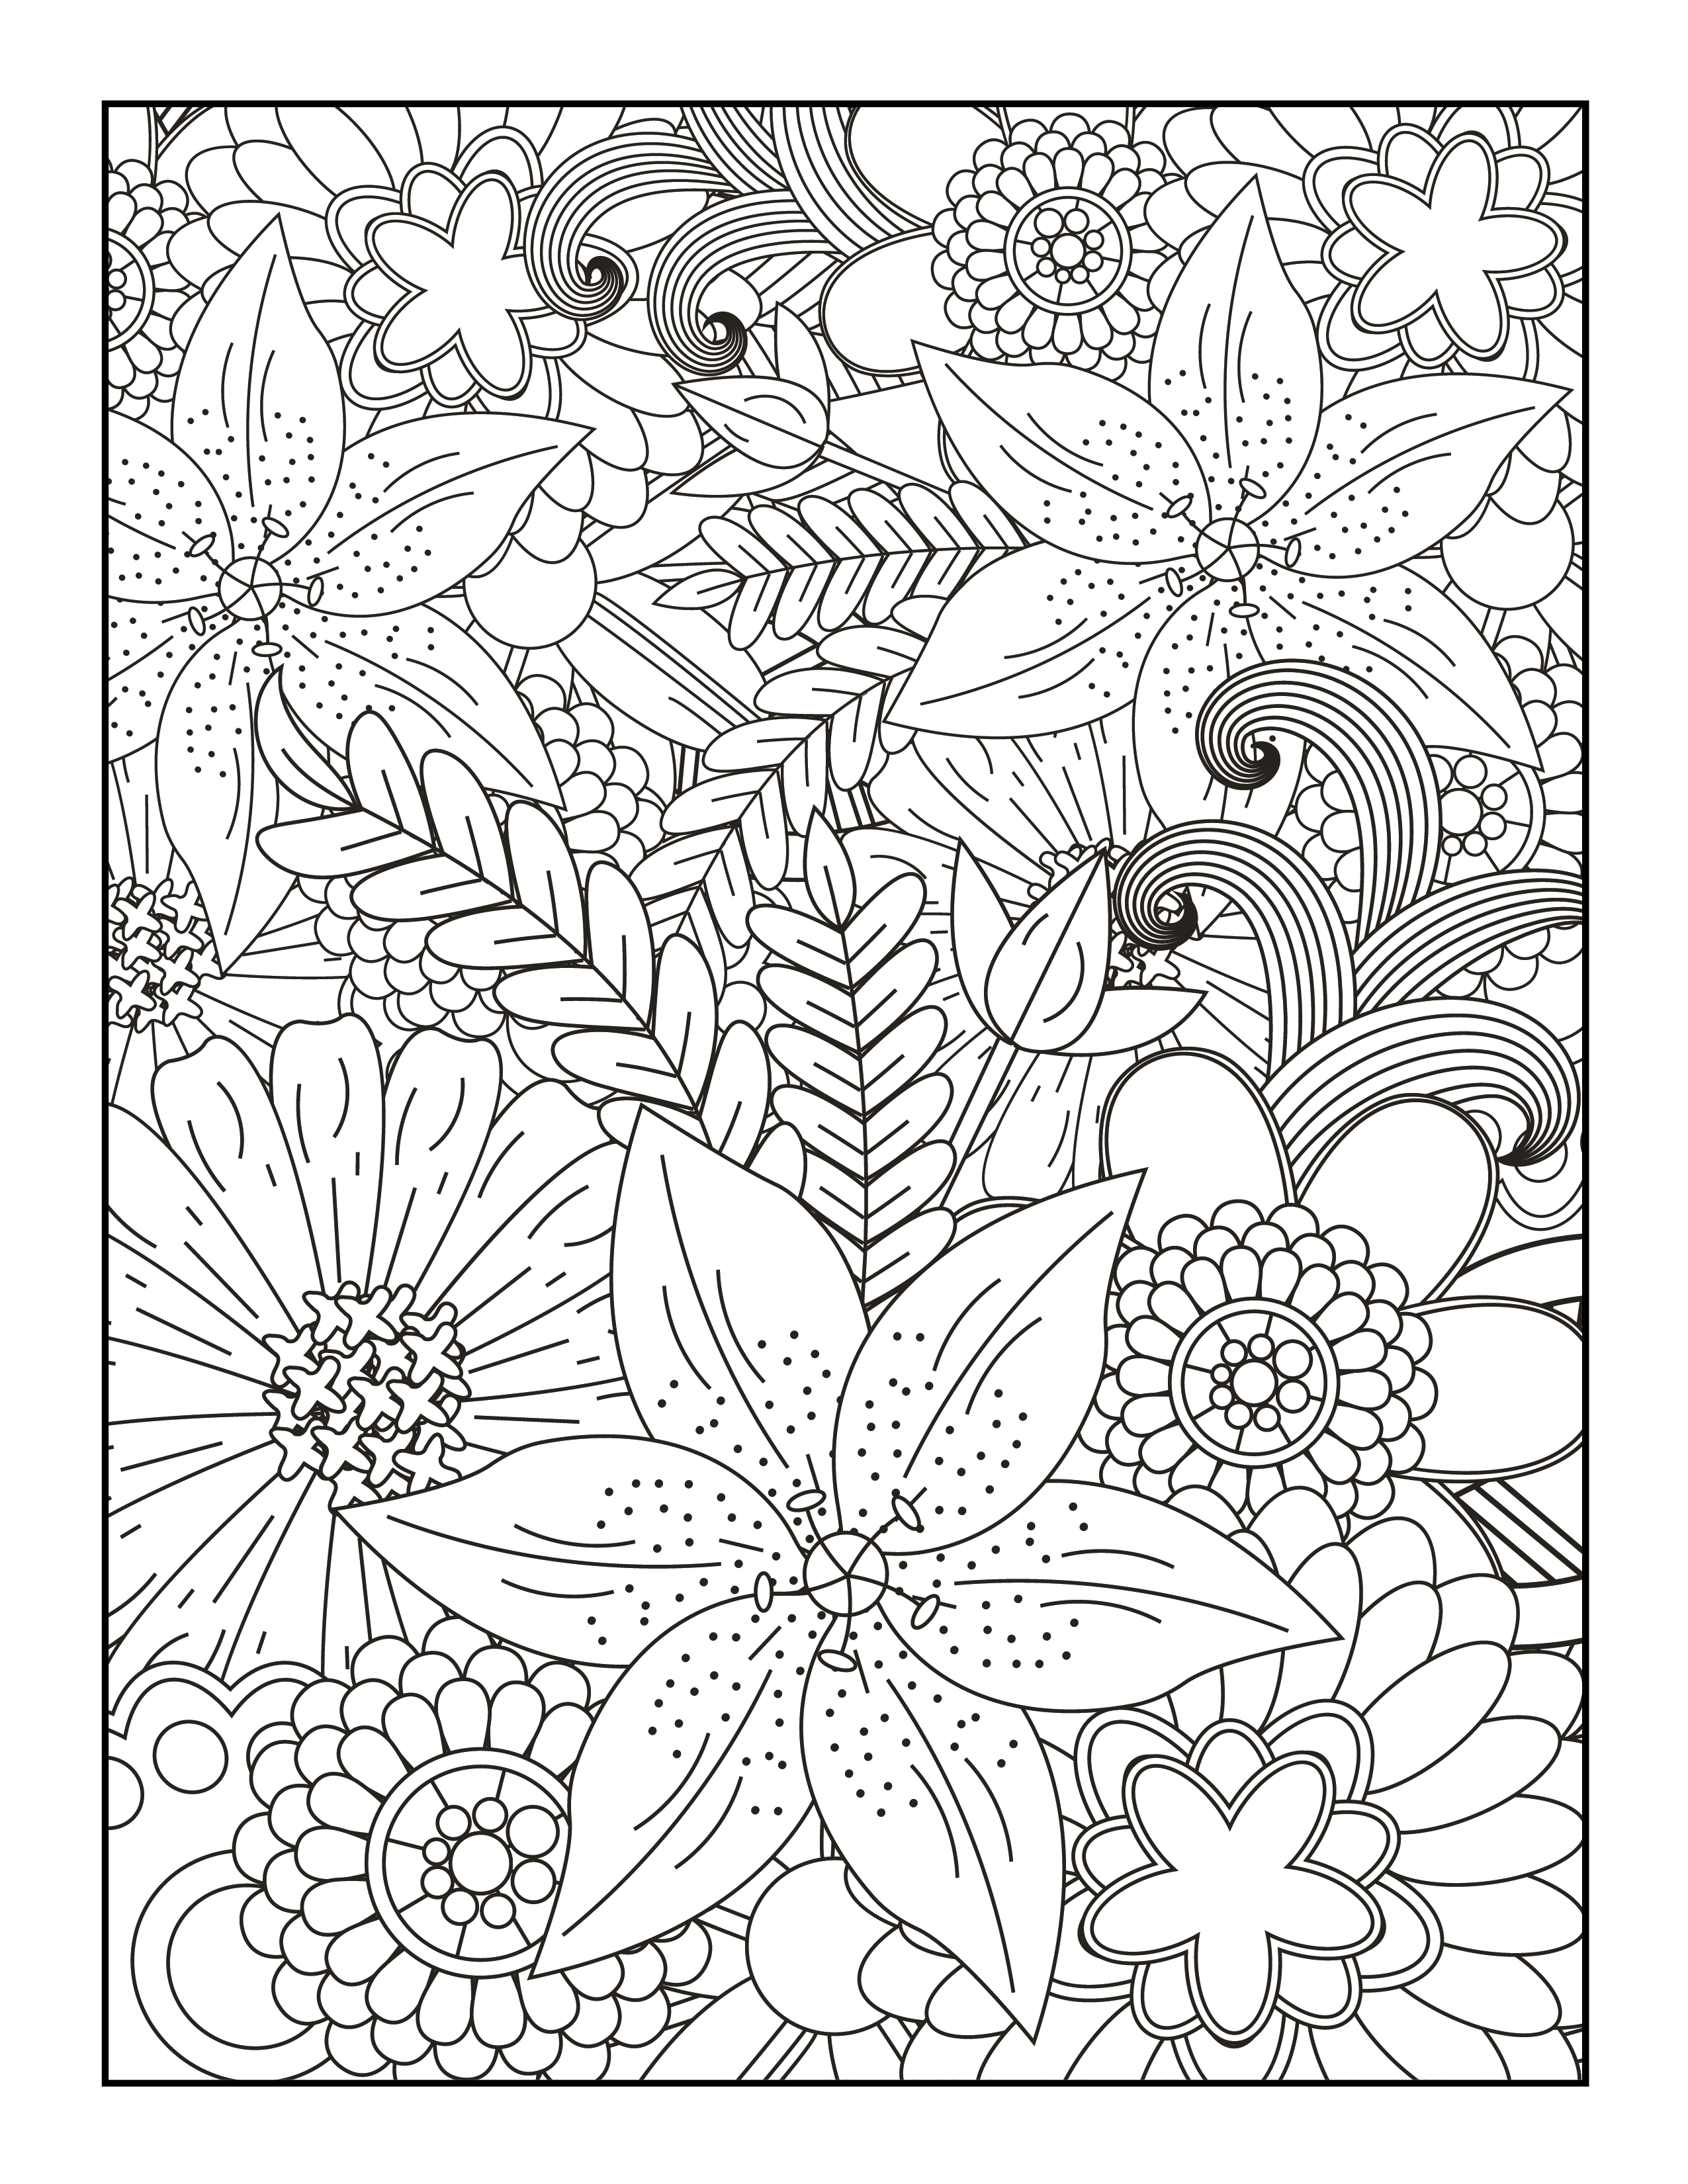 Color your world intricate zentangle flower designs for coloring made by teachers